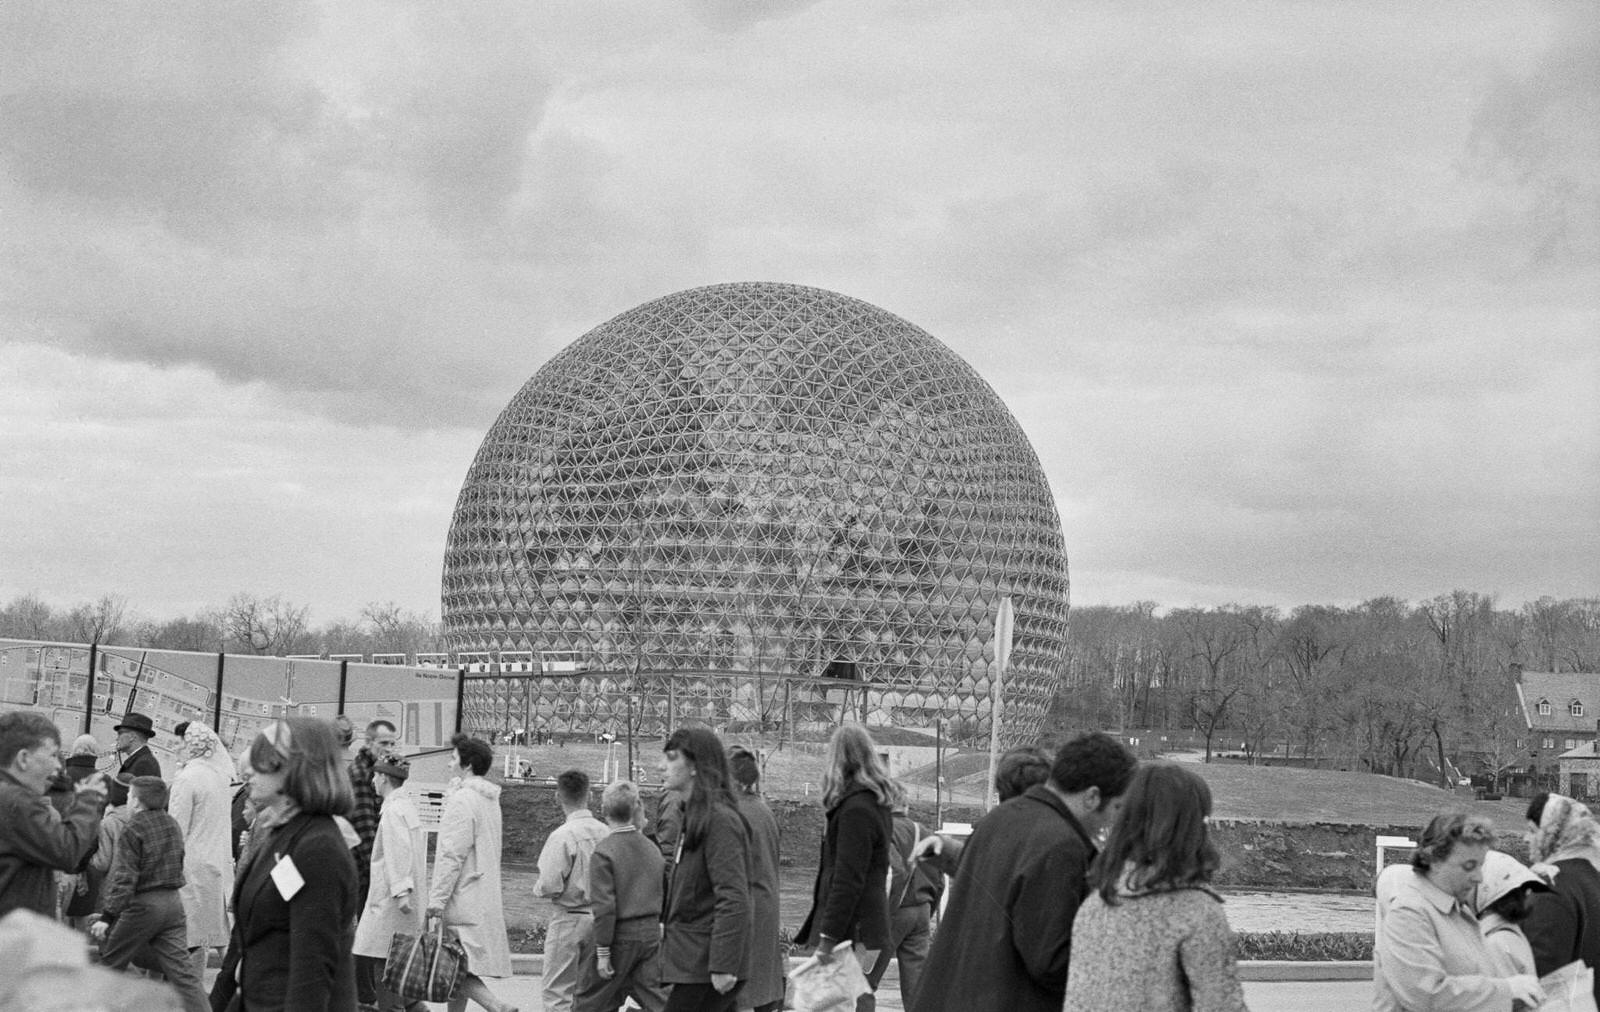 The American pavilion at the 1967 World's Fair in Montreal, Canada, in 1967.